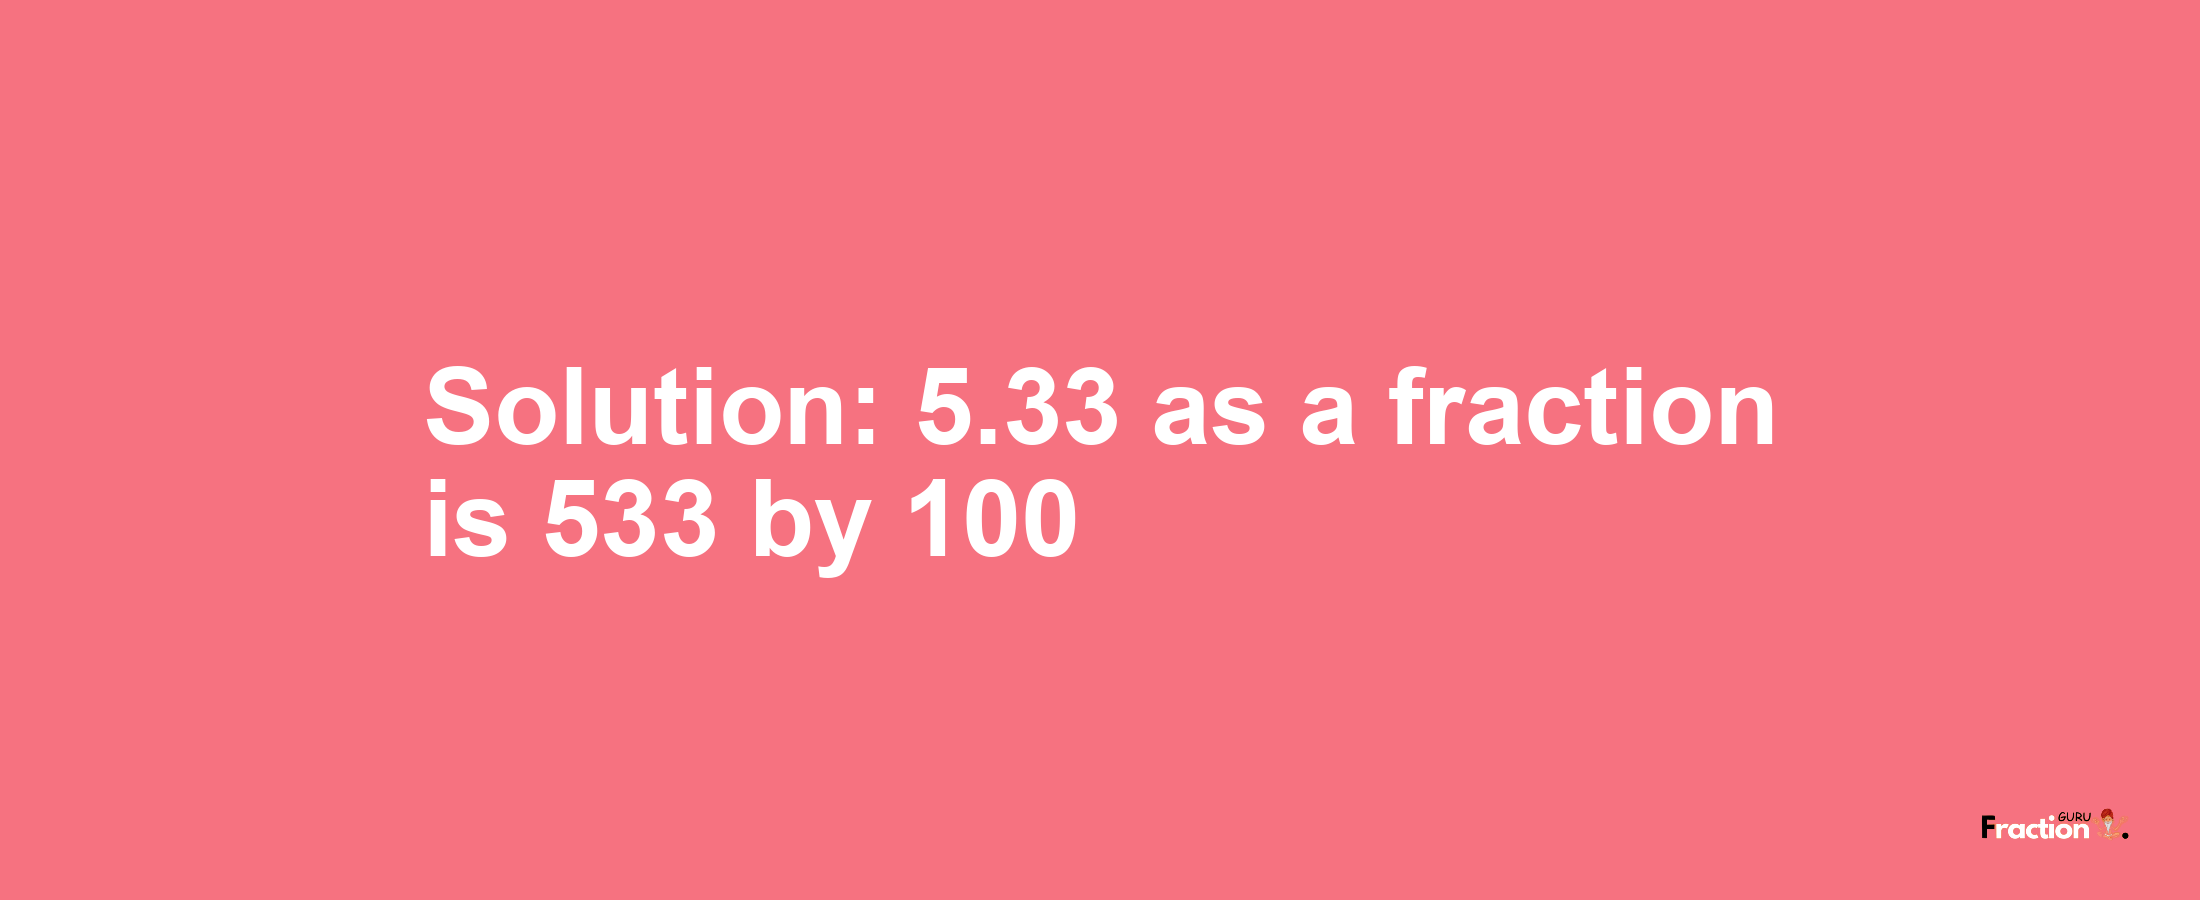 Solution:5.33 as a fraction is 533/100